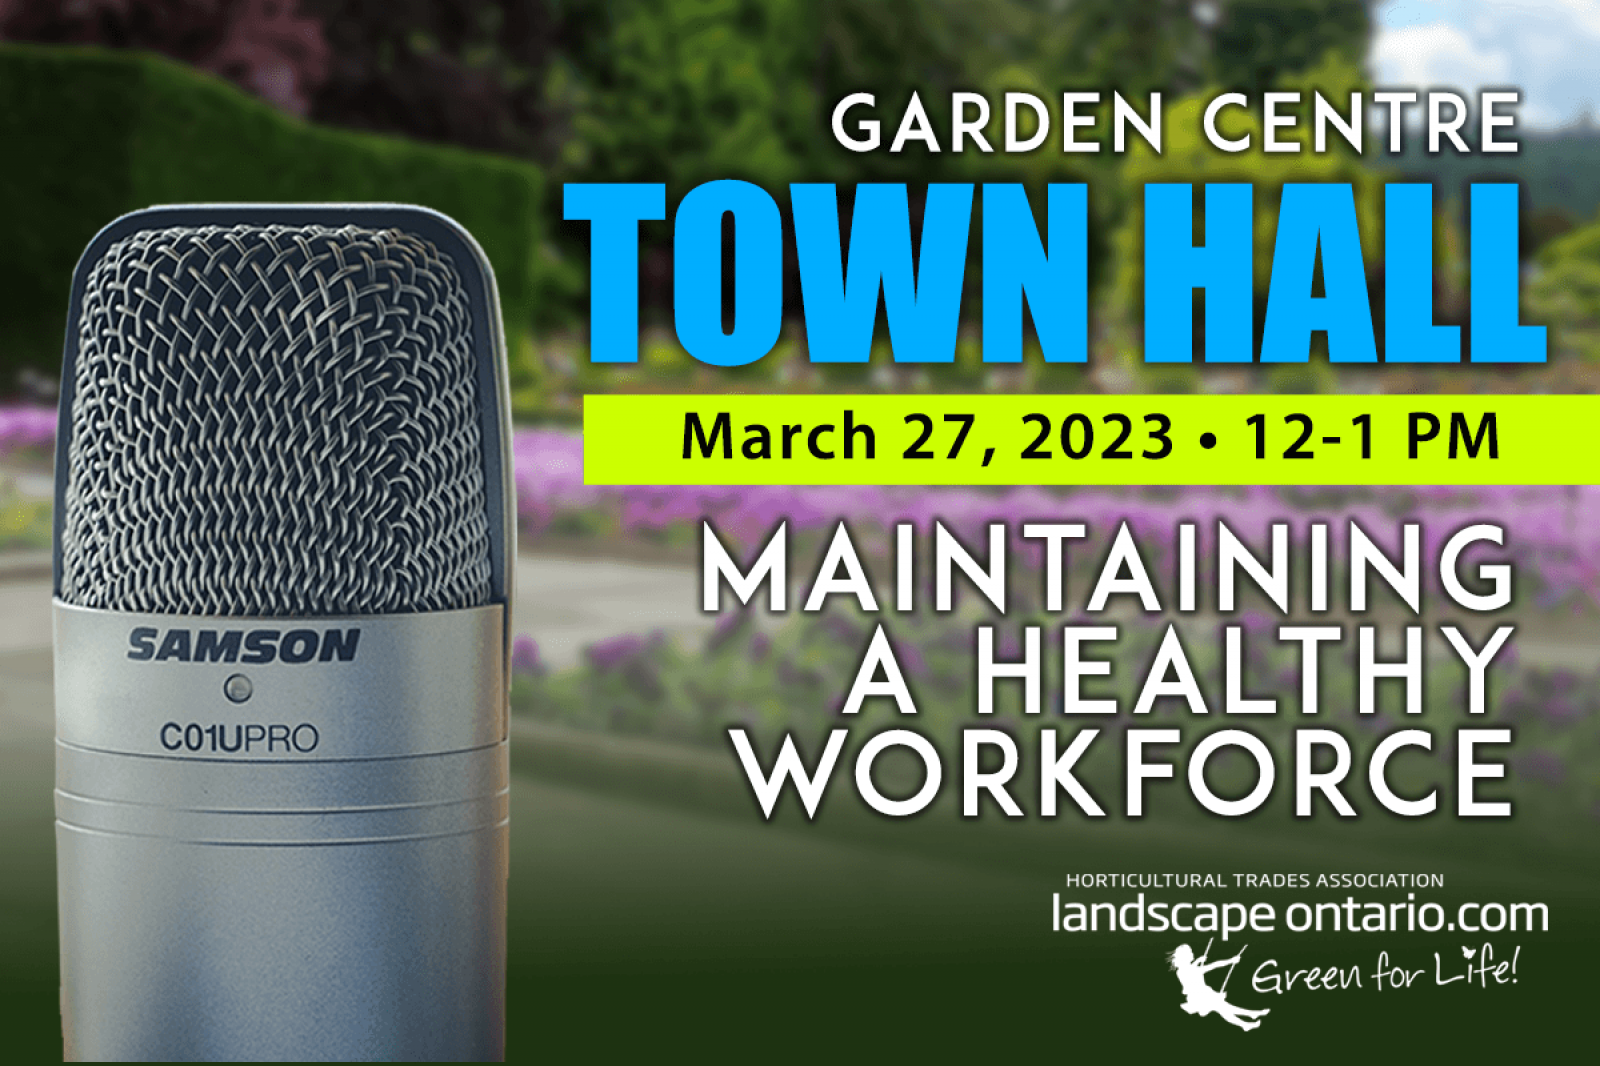 Garden Centre Town Hall: Maintaining a Healthy Workforce